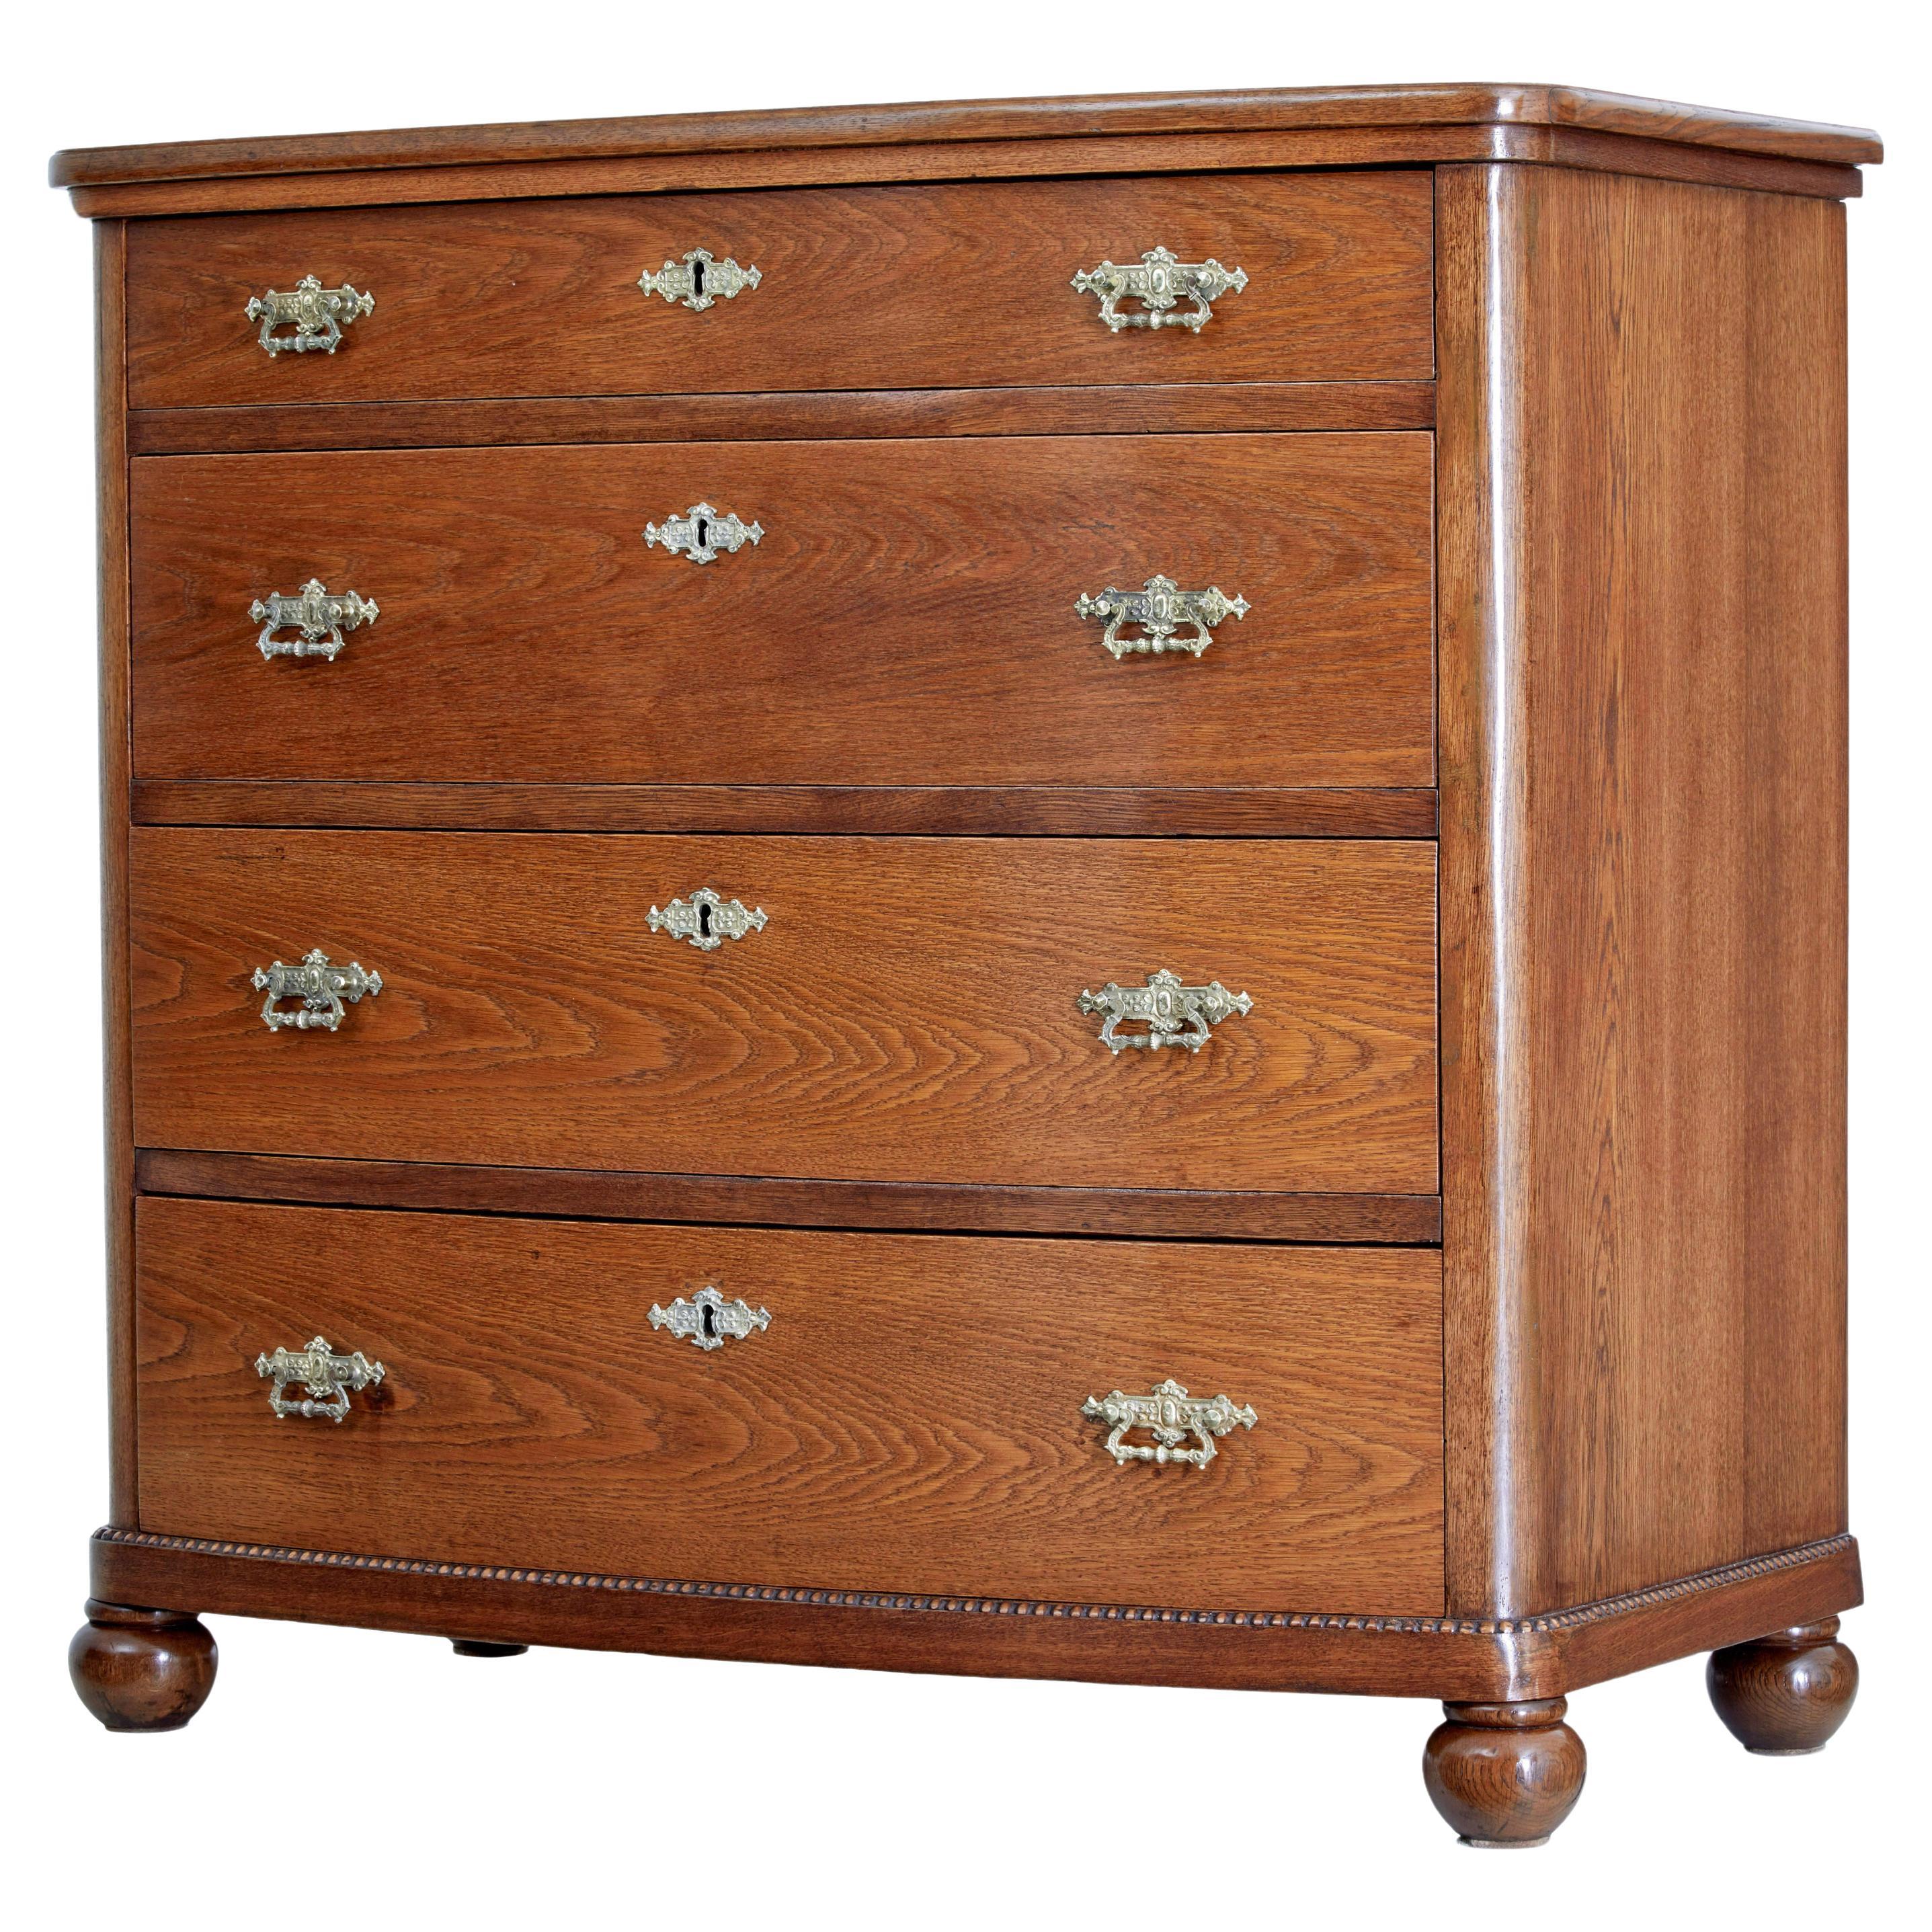 19th Century bowfront oak chest of drawers